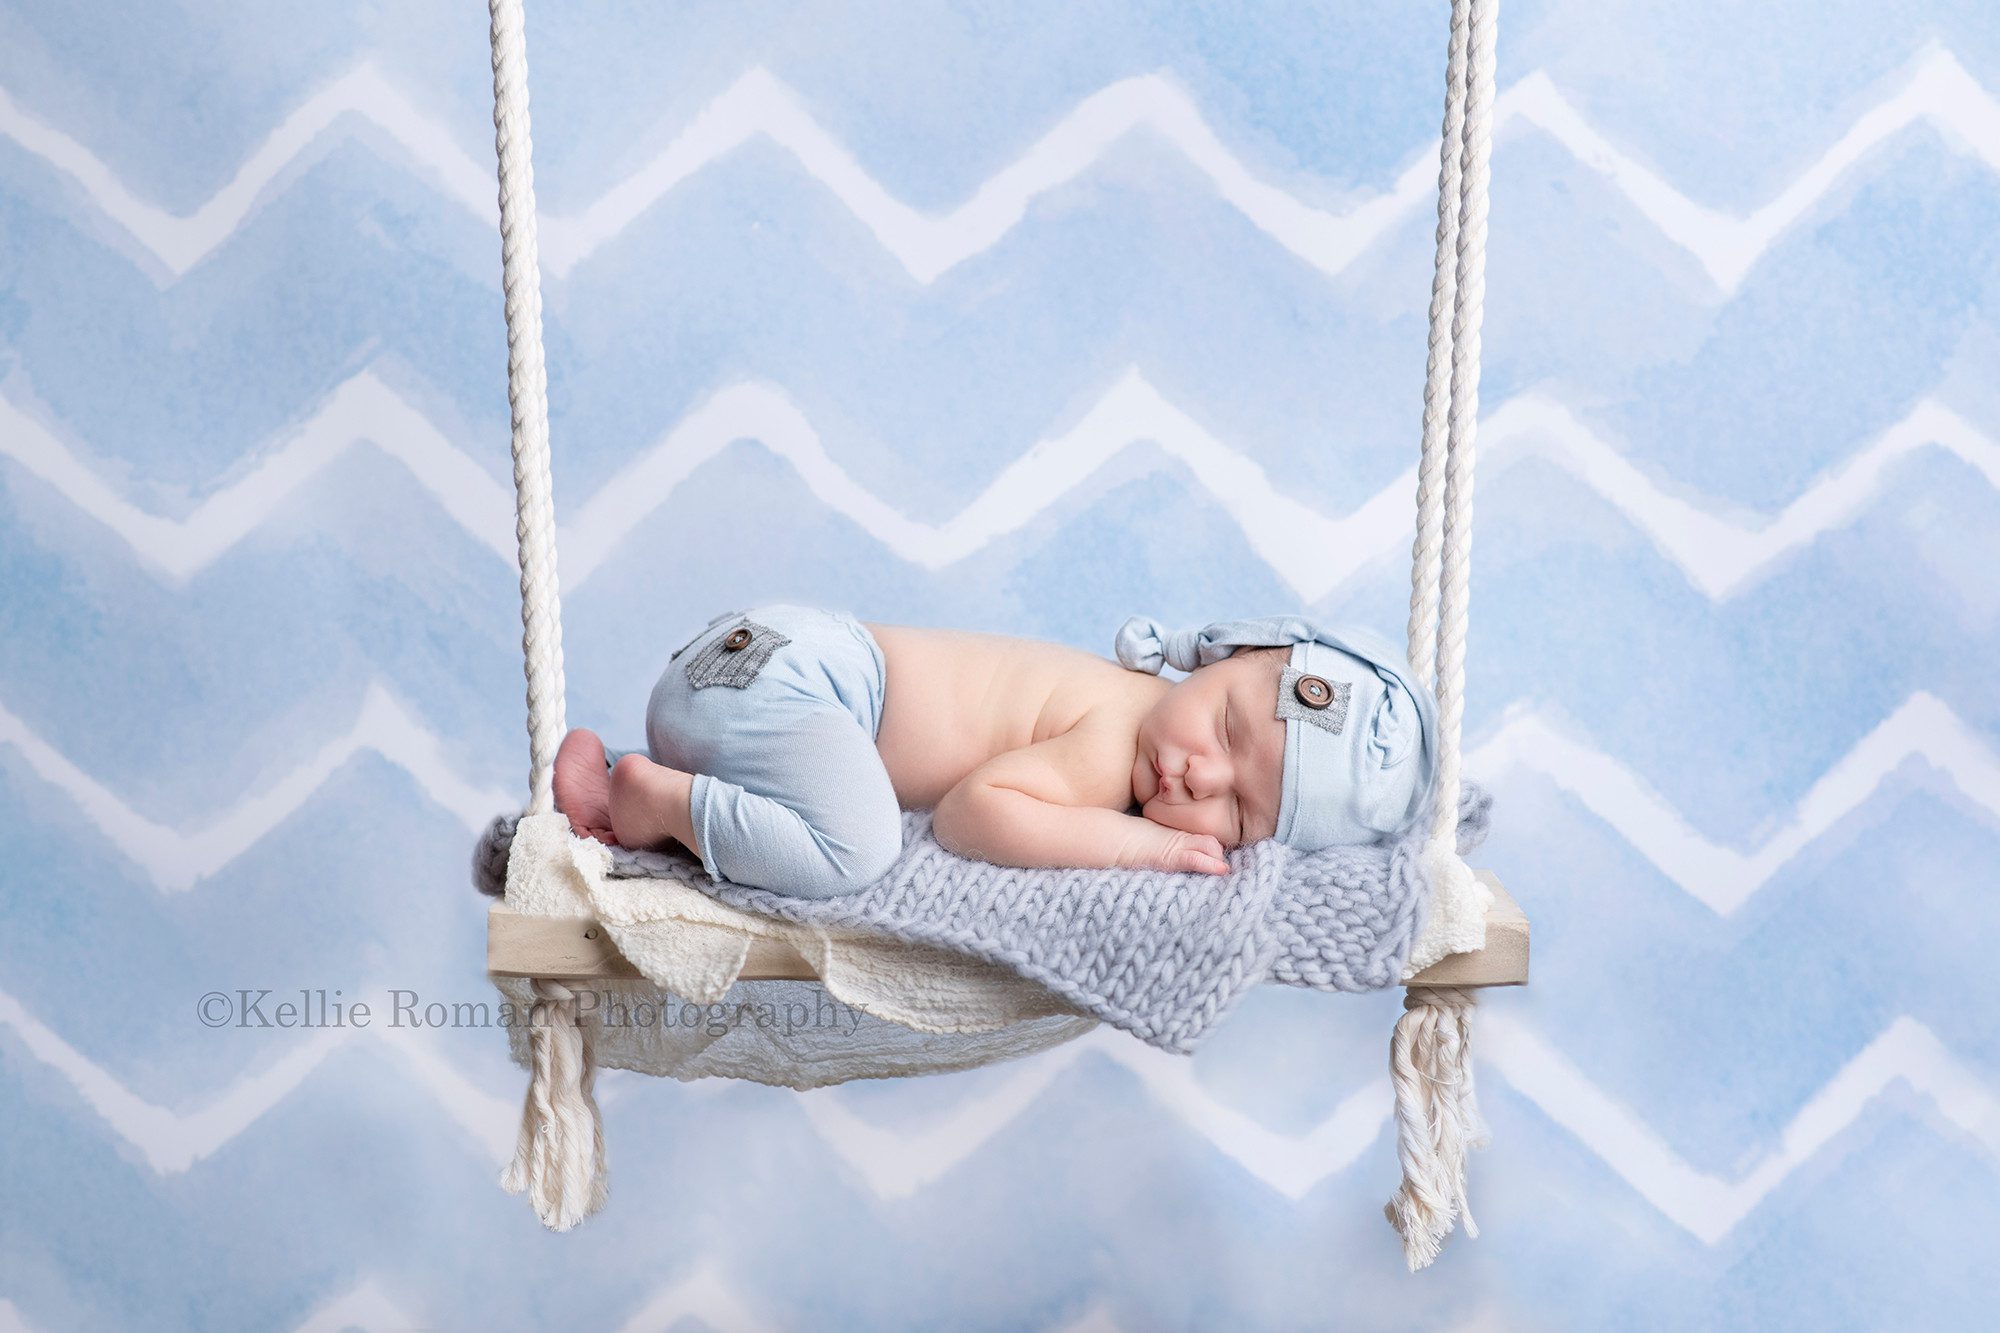 baby pics a newborn baby boy who is laying asleep on a wood swing he is in front of a blue and white chevron backdrop wearing light blue pants and a hat the image is a composite shot so it looks as if the swing is actually hanging with the newborn on it Milwaukee photographer is taking the image